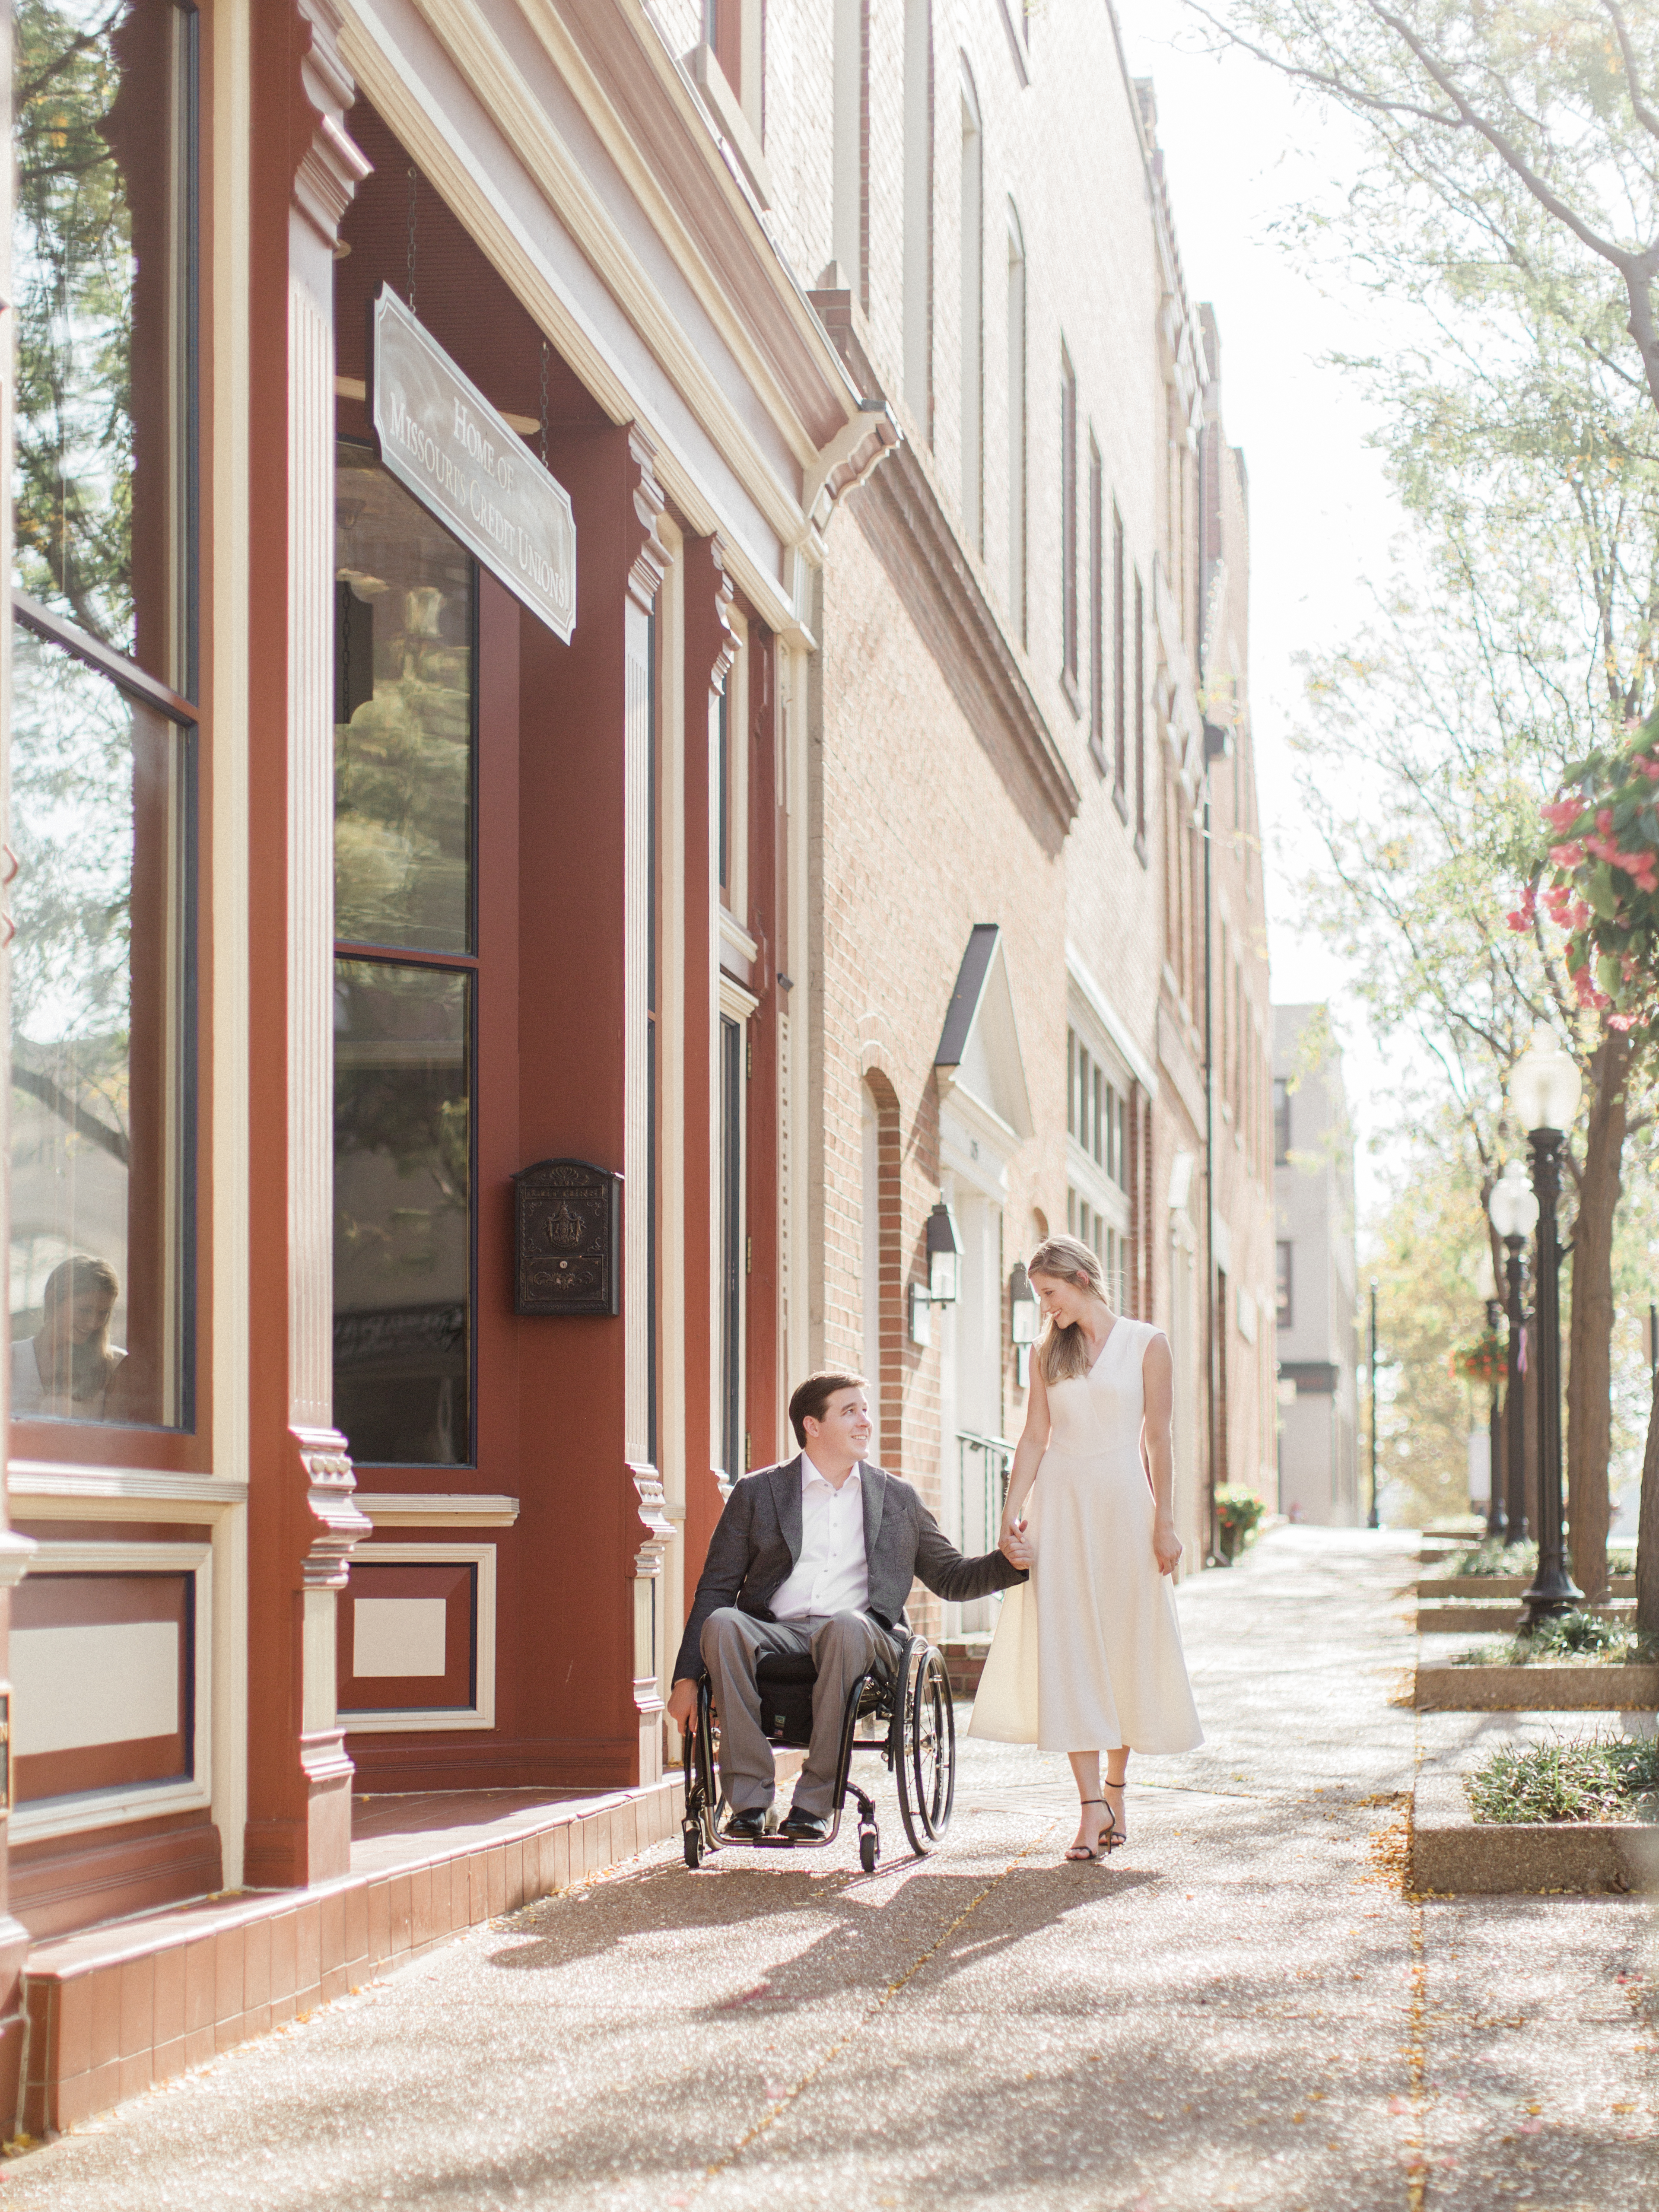 A sweet engagement session stroll by Love Tree Studios in Jefferson City, Missouri.